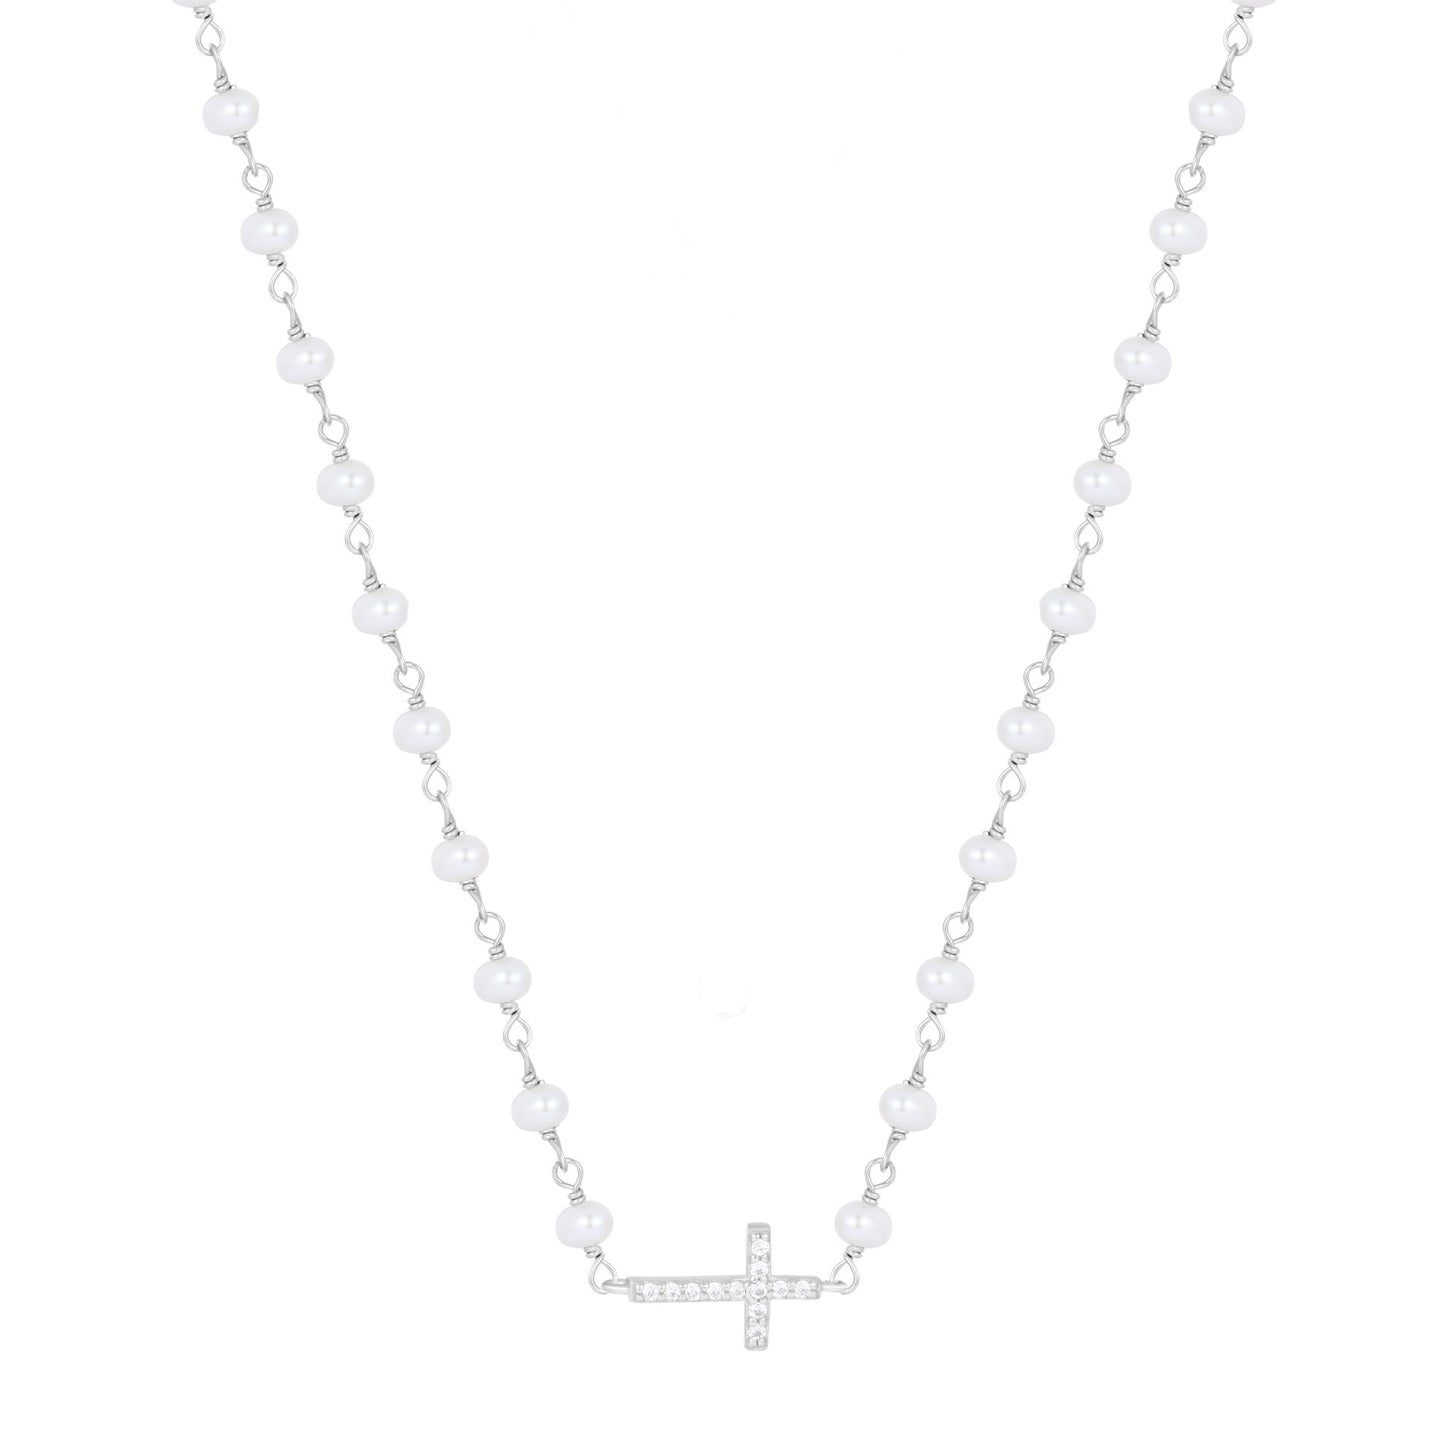 KATERINA CROSS PEARL BEADED SILVER NECKLACE